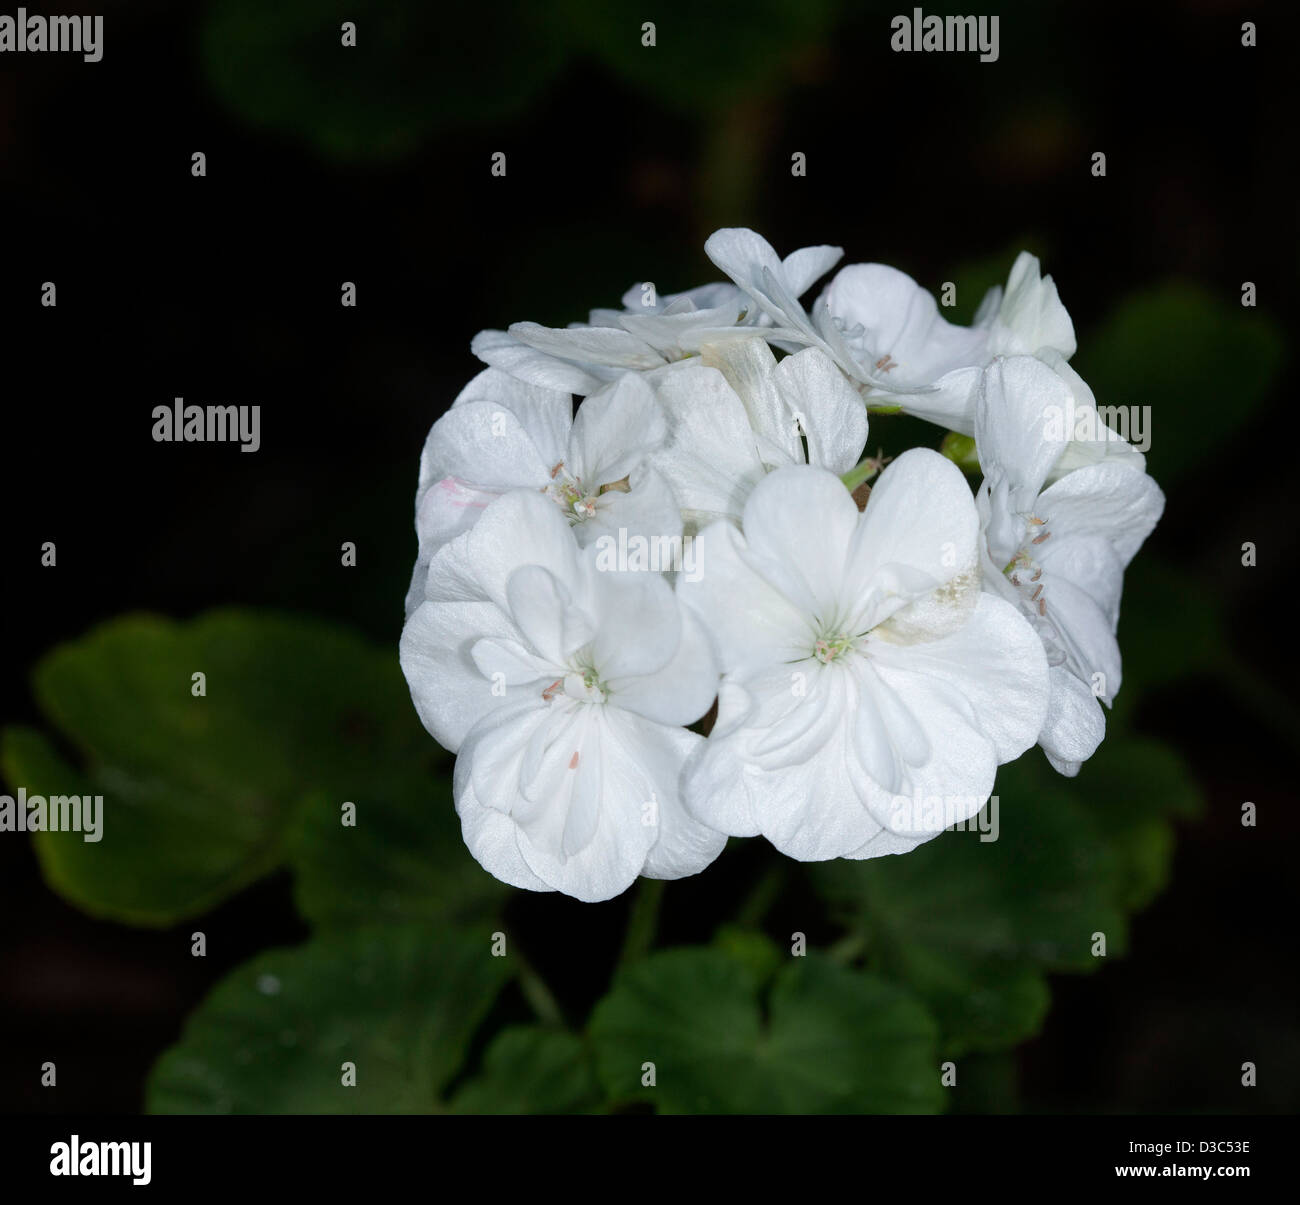 Cluster of double white flowers of Geranium cultivar 'Snowball' against a dark background Stock Photo